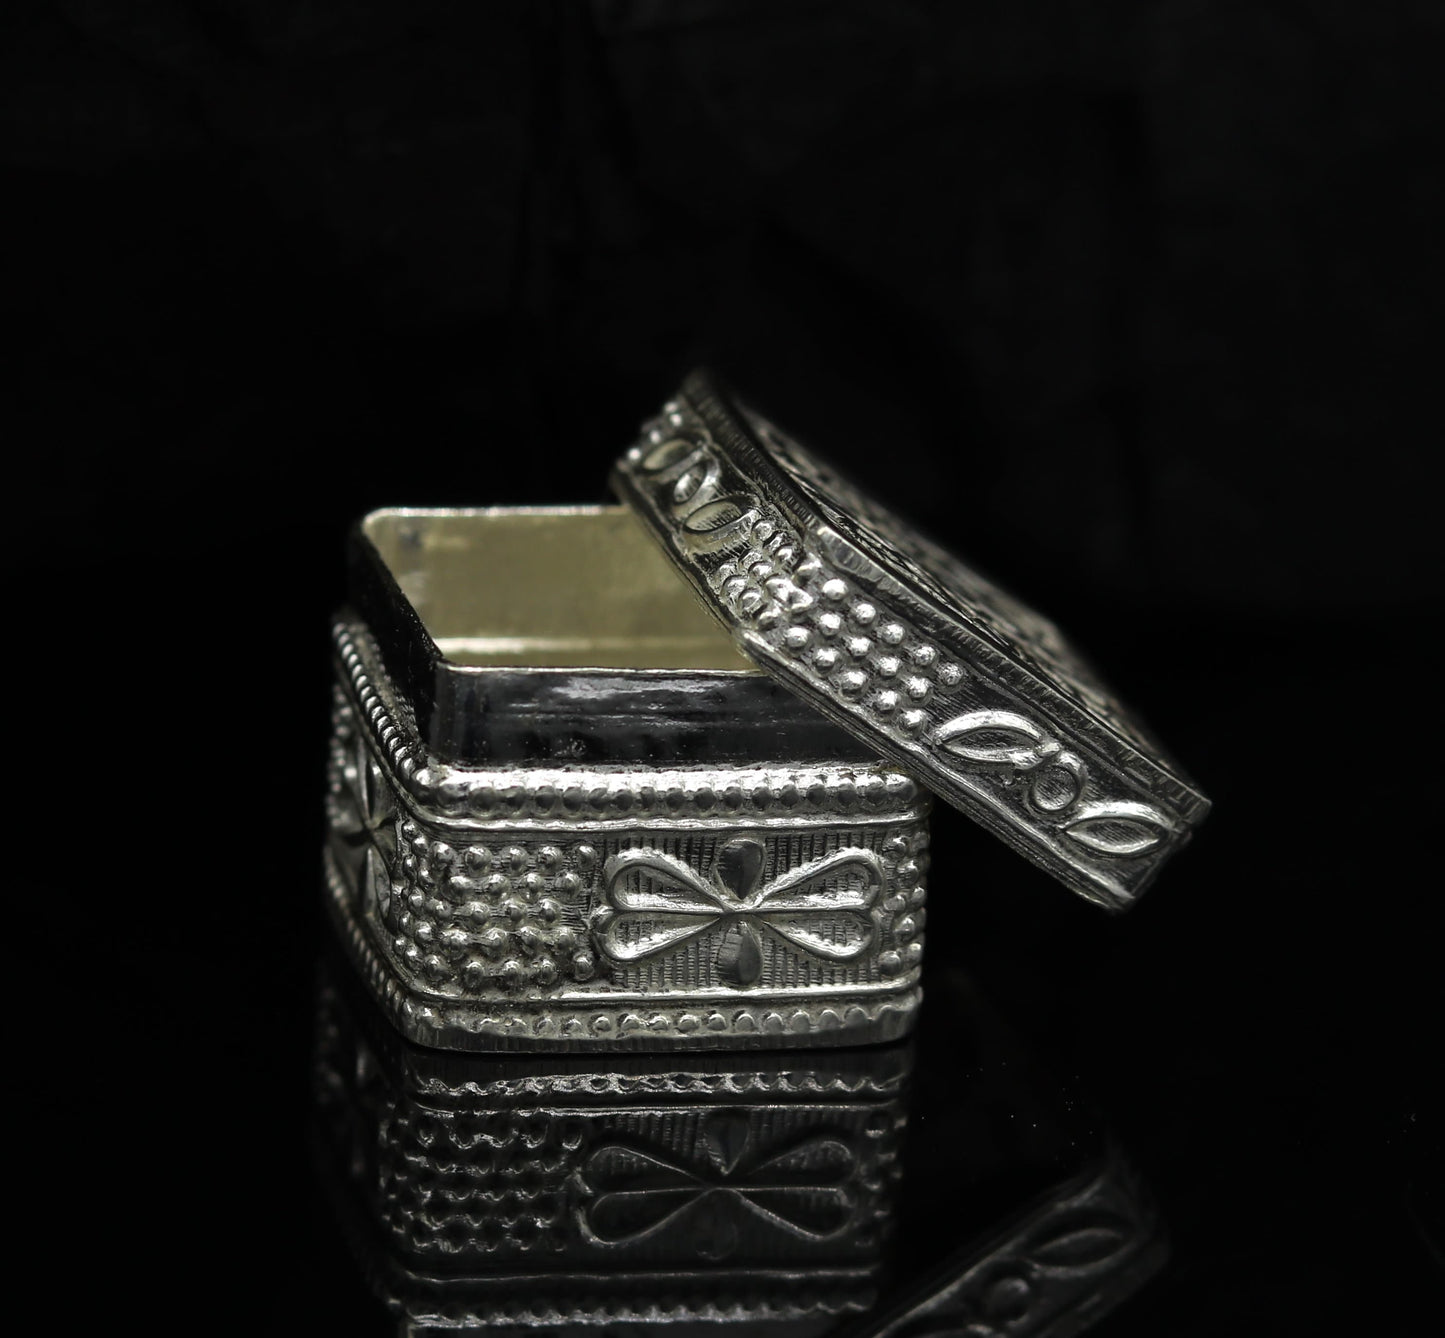 vintage style small bridal queen sterling silver trinket box or eyes kajal box, container box, small jewelry box, bridal art gifting  stb59 - TRIBAL ORNAMENTS